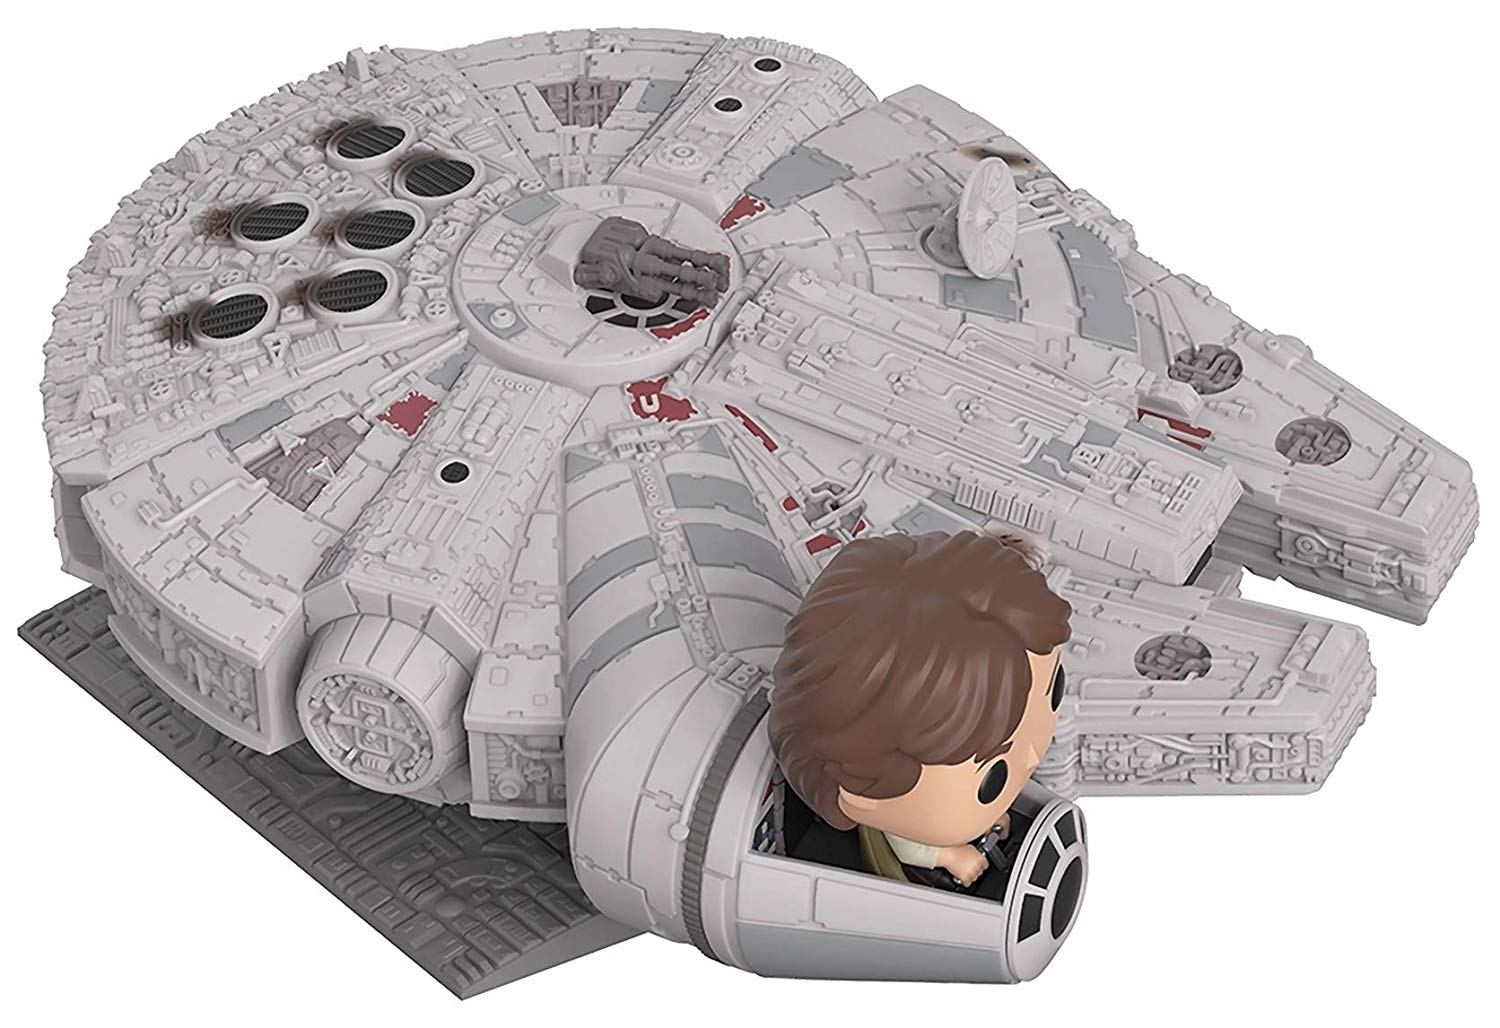 Amazon Prime Day Star Wars Exclusive Features Funko Pop Deluxe Millennium Falcon With Han Solo